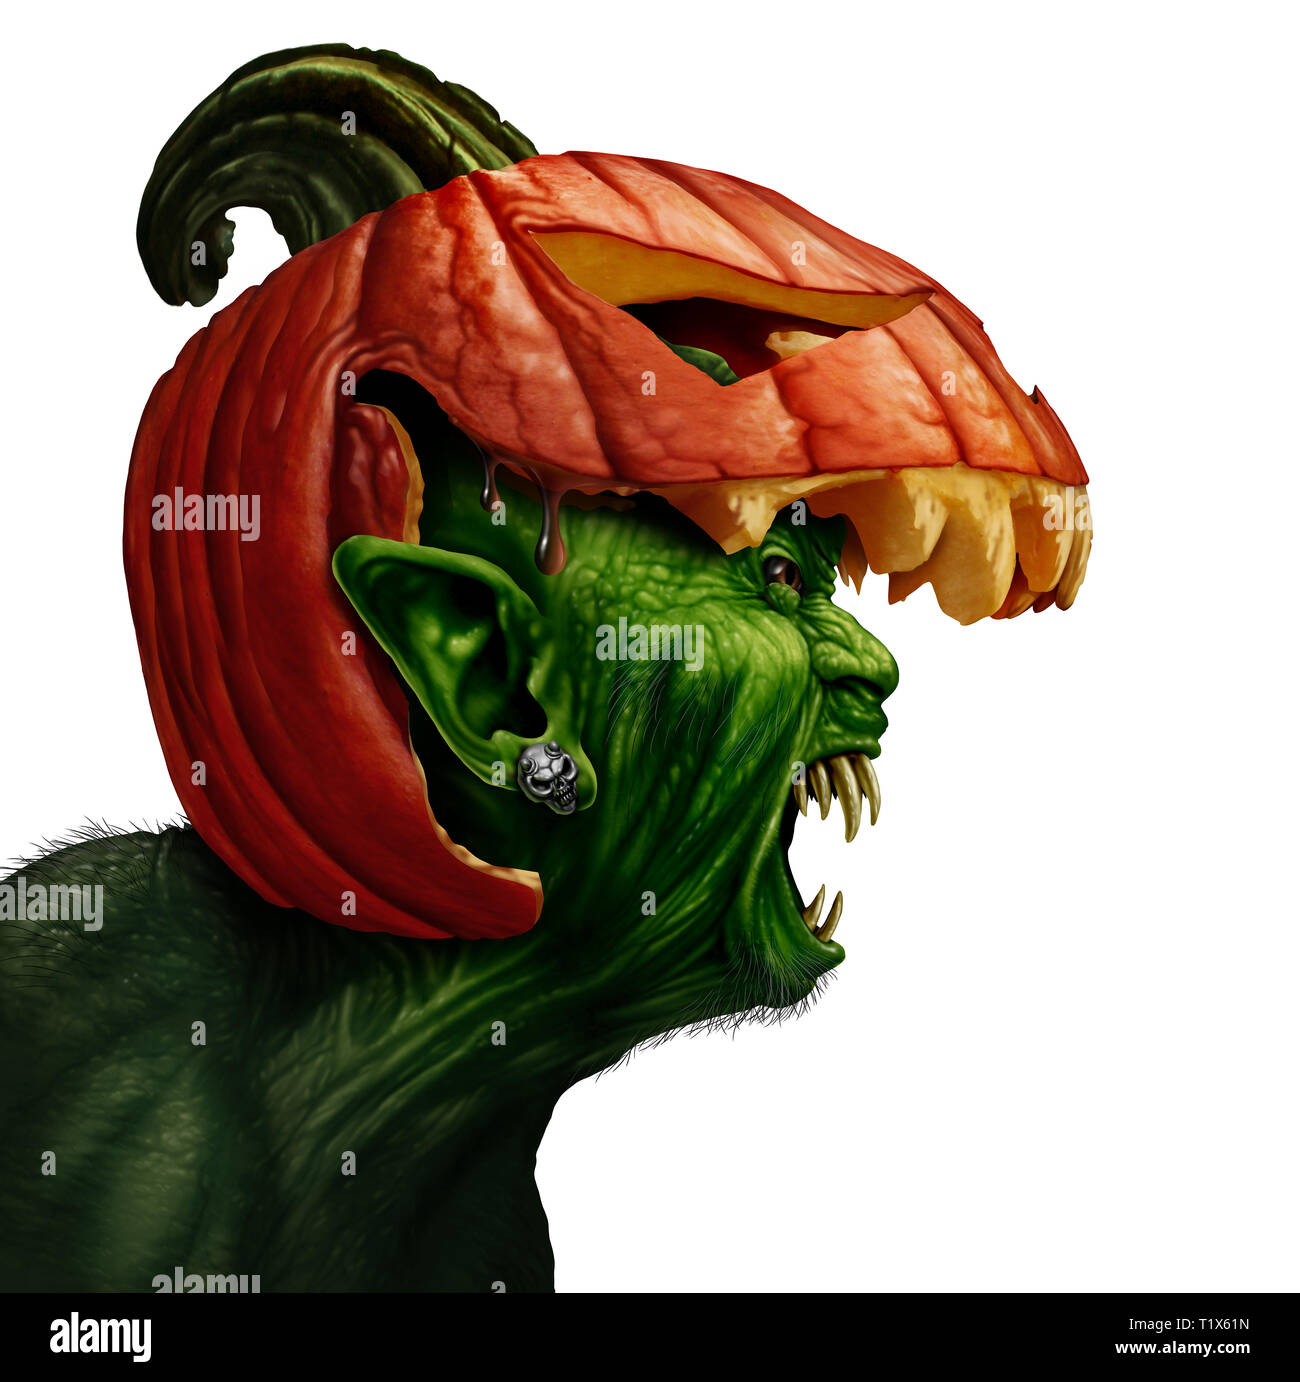 Halloween pumpkin monster side view as a zombie face or mutant beast head screaming as a creepy green demon symbol with a jack o lantern. Stock Photo